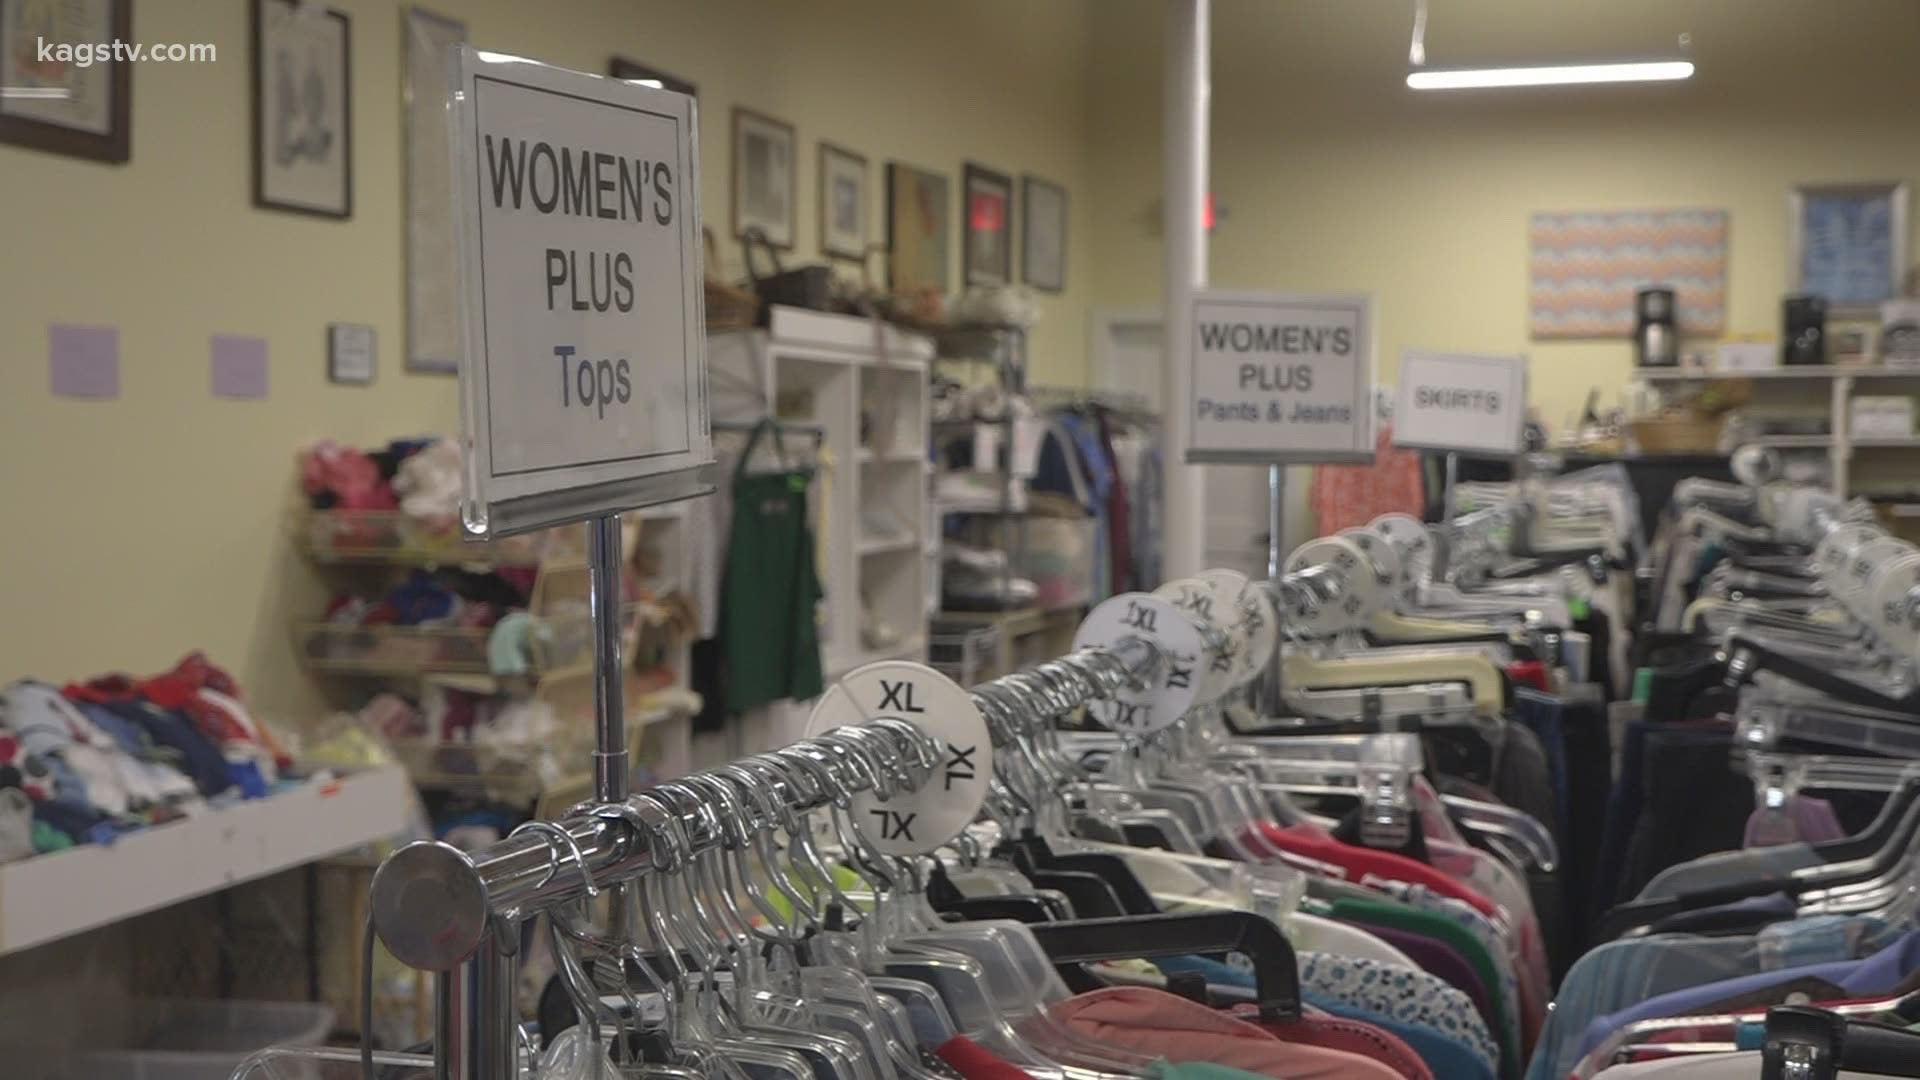 St. Vincent de Paul Thrift Store will reopen its doors June 2. There will be a few changes to how people can donate items and interact in the store.